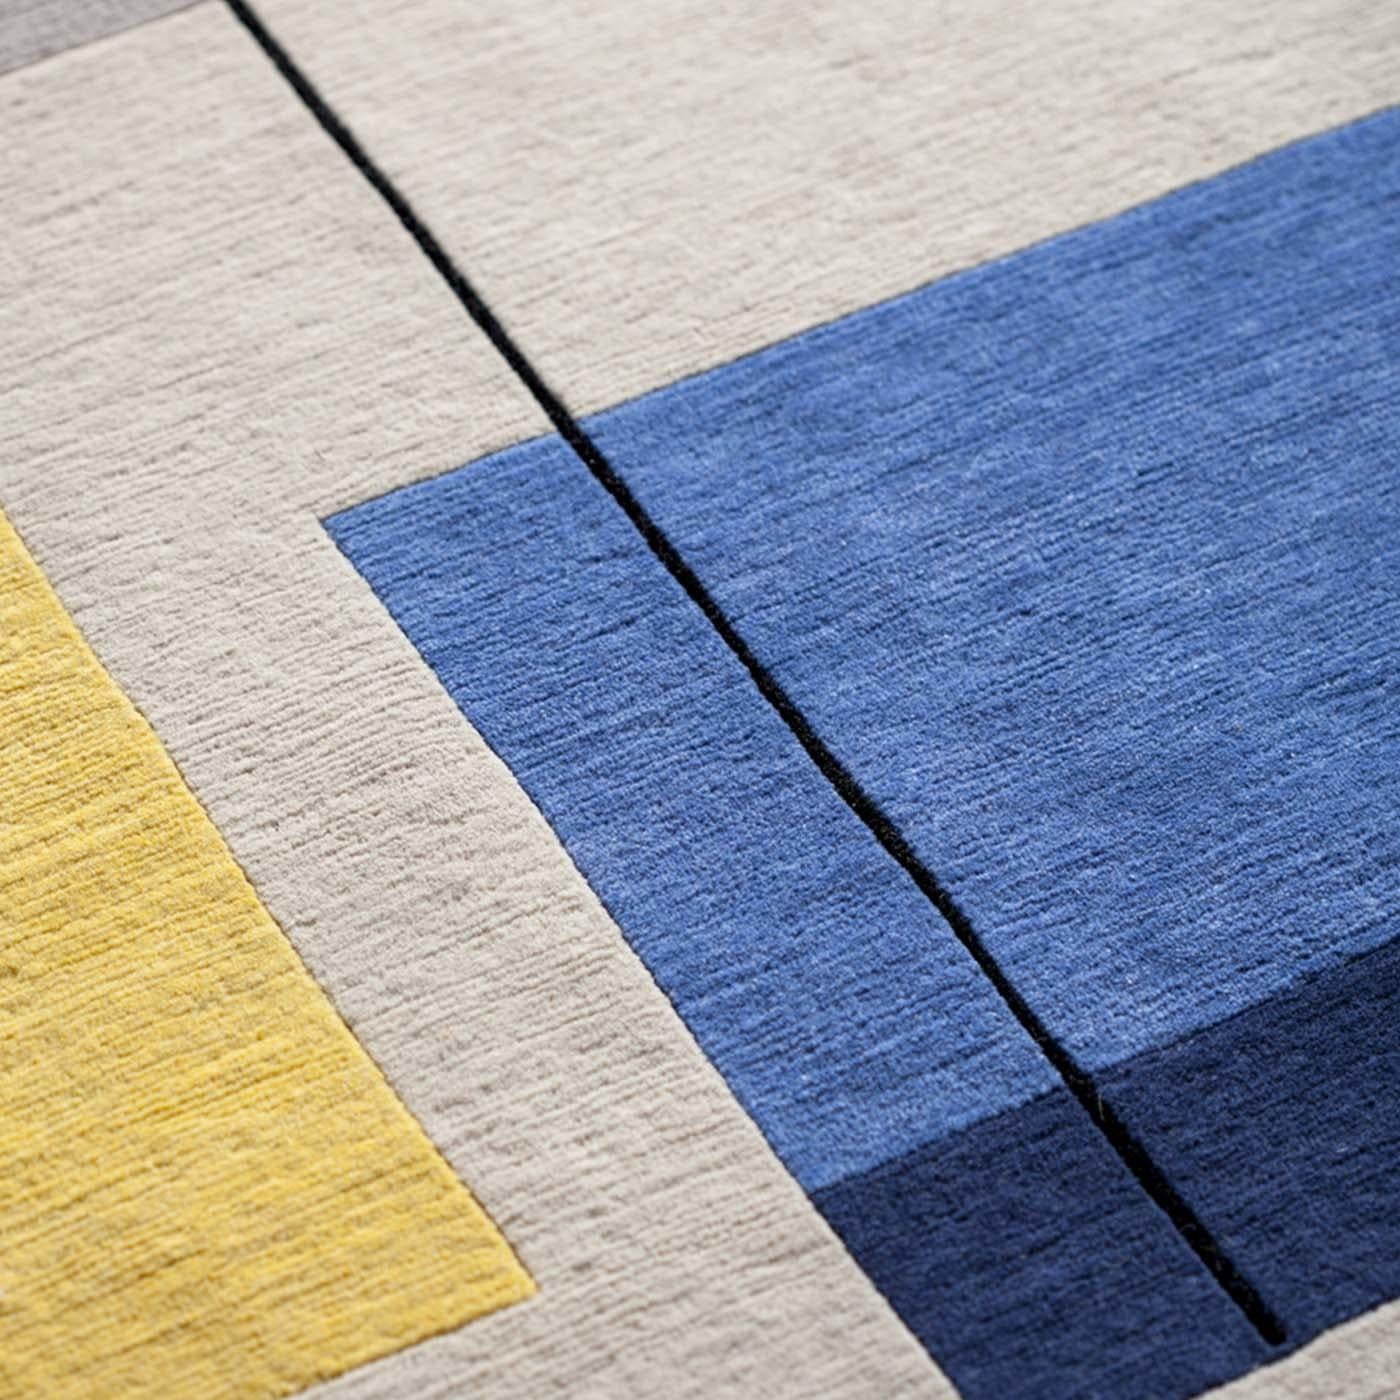 Composizione 57 10 arises from the desire to produce carpets that feature the pure shapes and palette of Manlio Rho, replicating the warmth of its colors that are borrowed from the outlying Lombard countryside. The carpet (300 x 200cm) becomes a